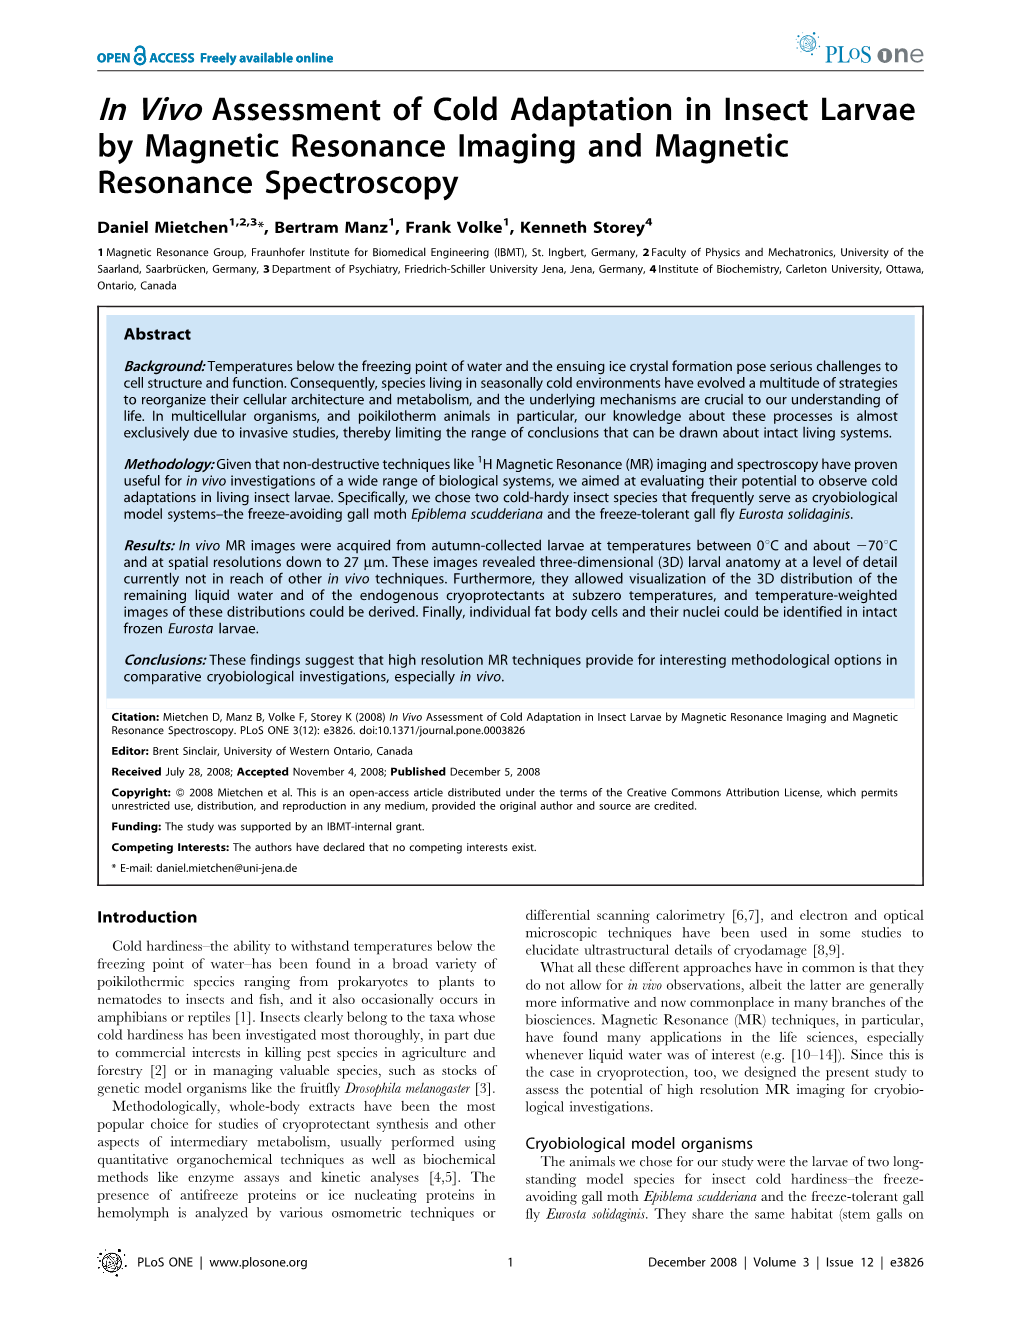 In Vivo Assessment of Cold Adaptation in Insect Larvae by Magnetic Resonance Imaging and Magnetic Resonance Spectroscopy